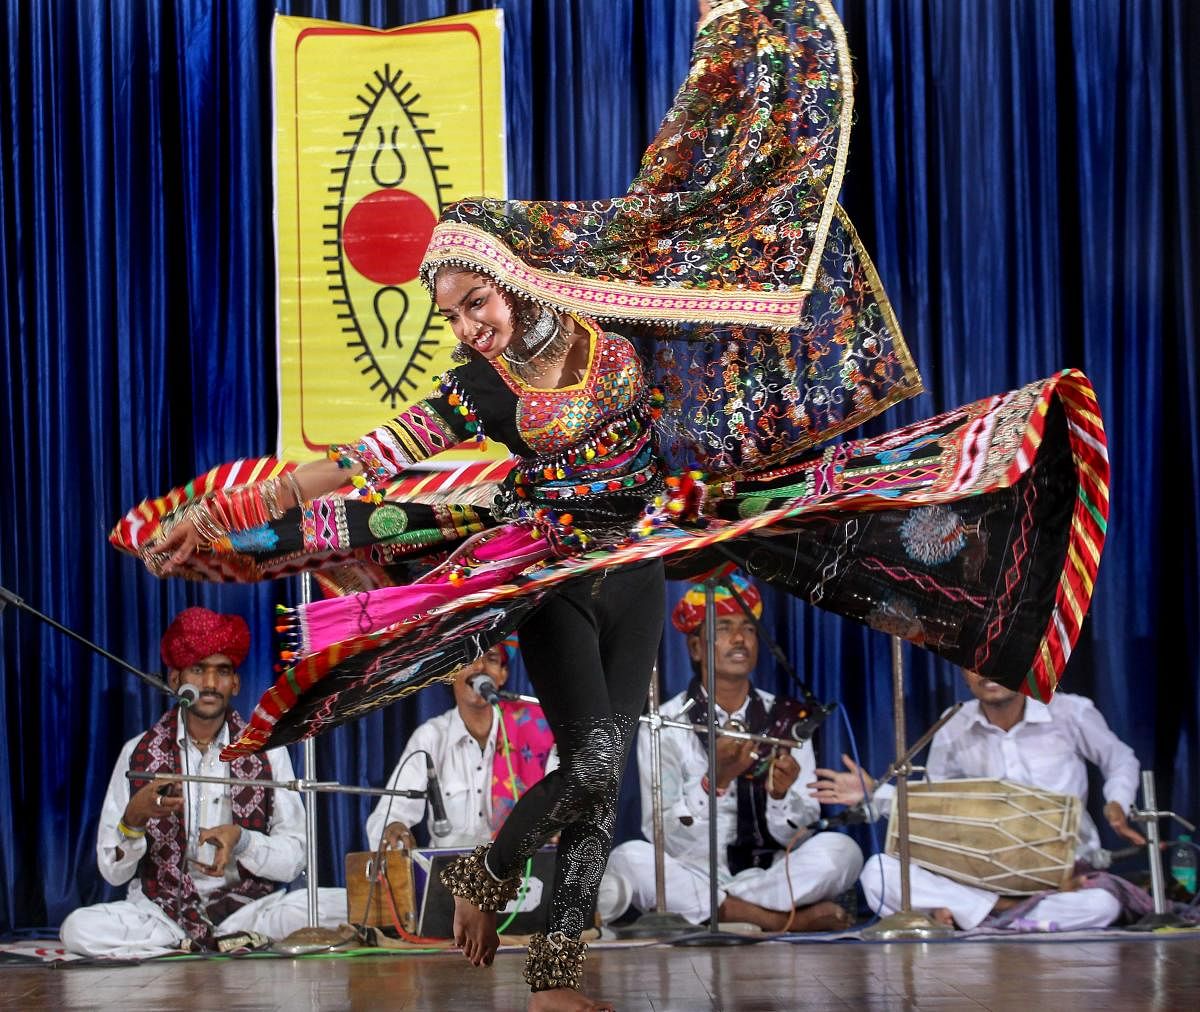 Rajasthani artists perform 'Kalbeliya' dance during an event conducted by Spic Macay, in Kozhikode on Monday, June 25, 2018. PTI